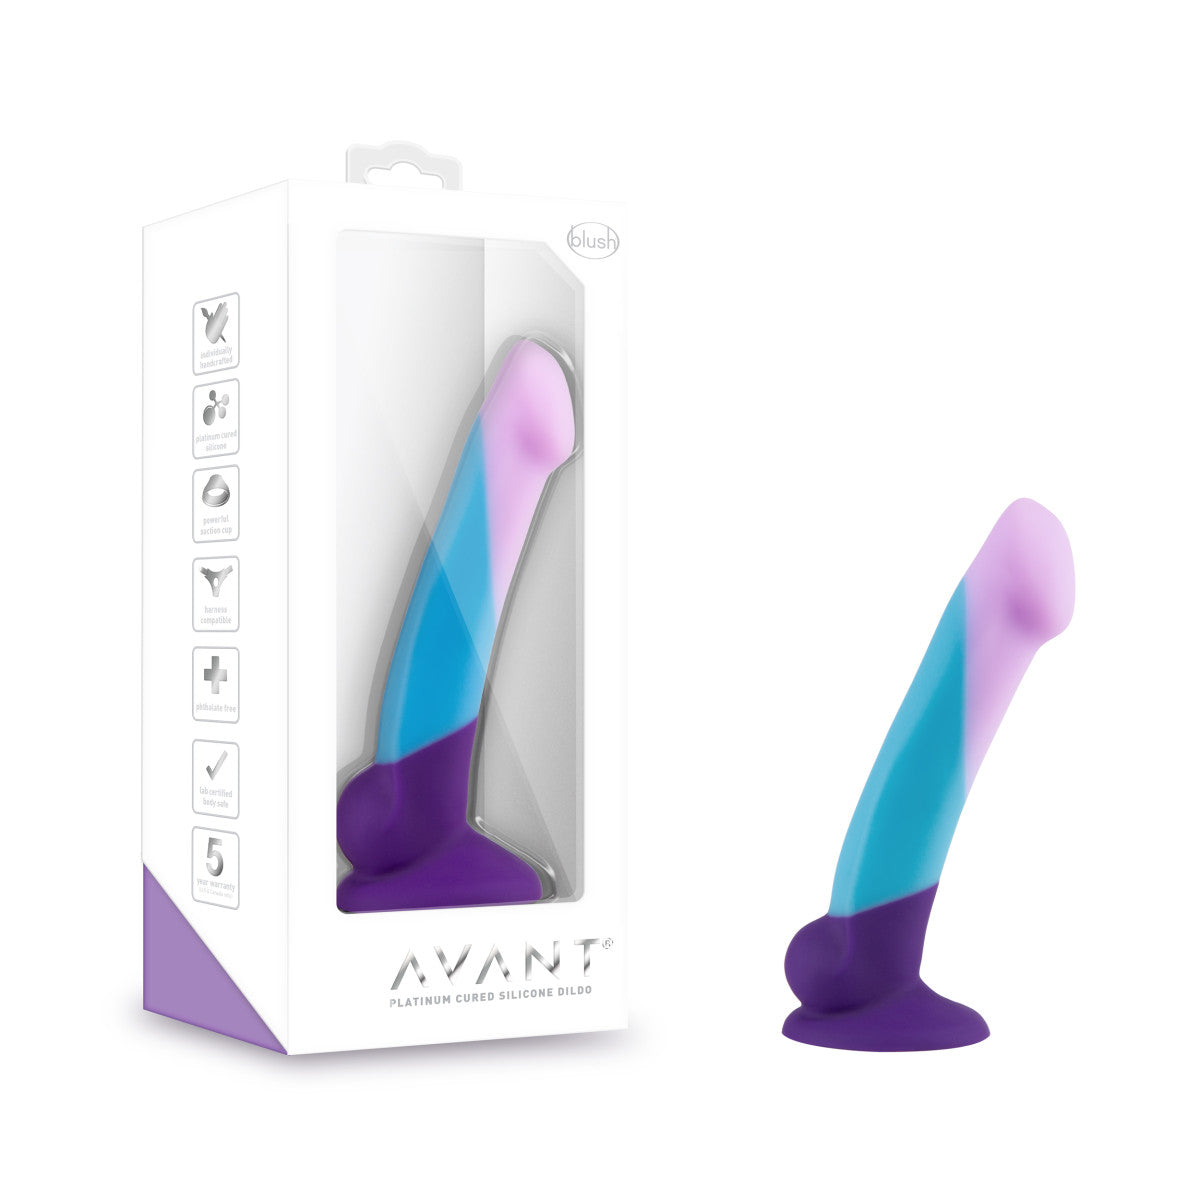 Blush Avant | Purple Haze D16: Artisan 7 Inch Curved G-Spot Dildo with Suction Cup Base - Elegantly Made with Smooth Ultrasilk® Purio™ Silicone